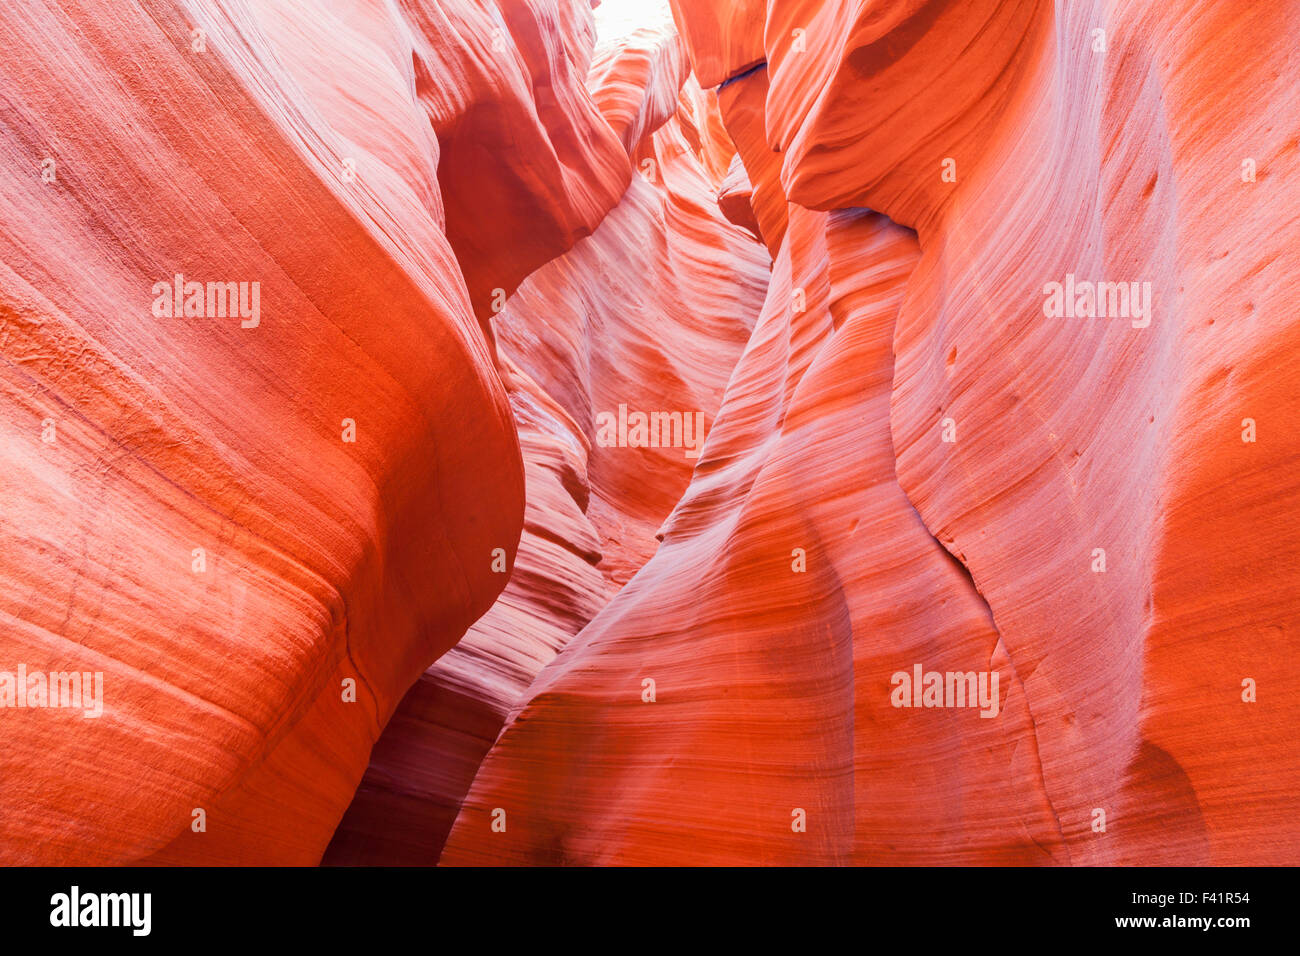 Bright orange sandstone walls in Antelope Canyon Arizona that have been eroded to a smooth surface. Stock Photo